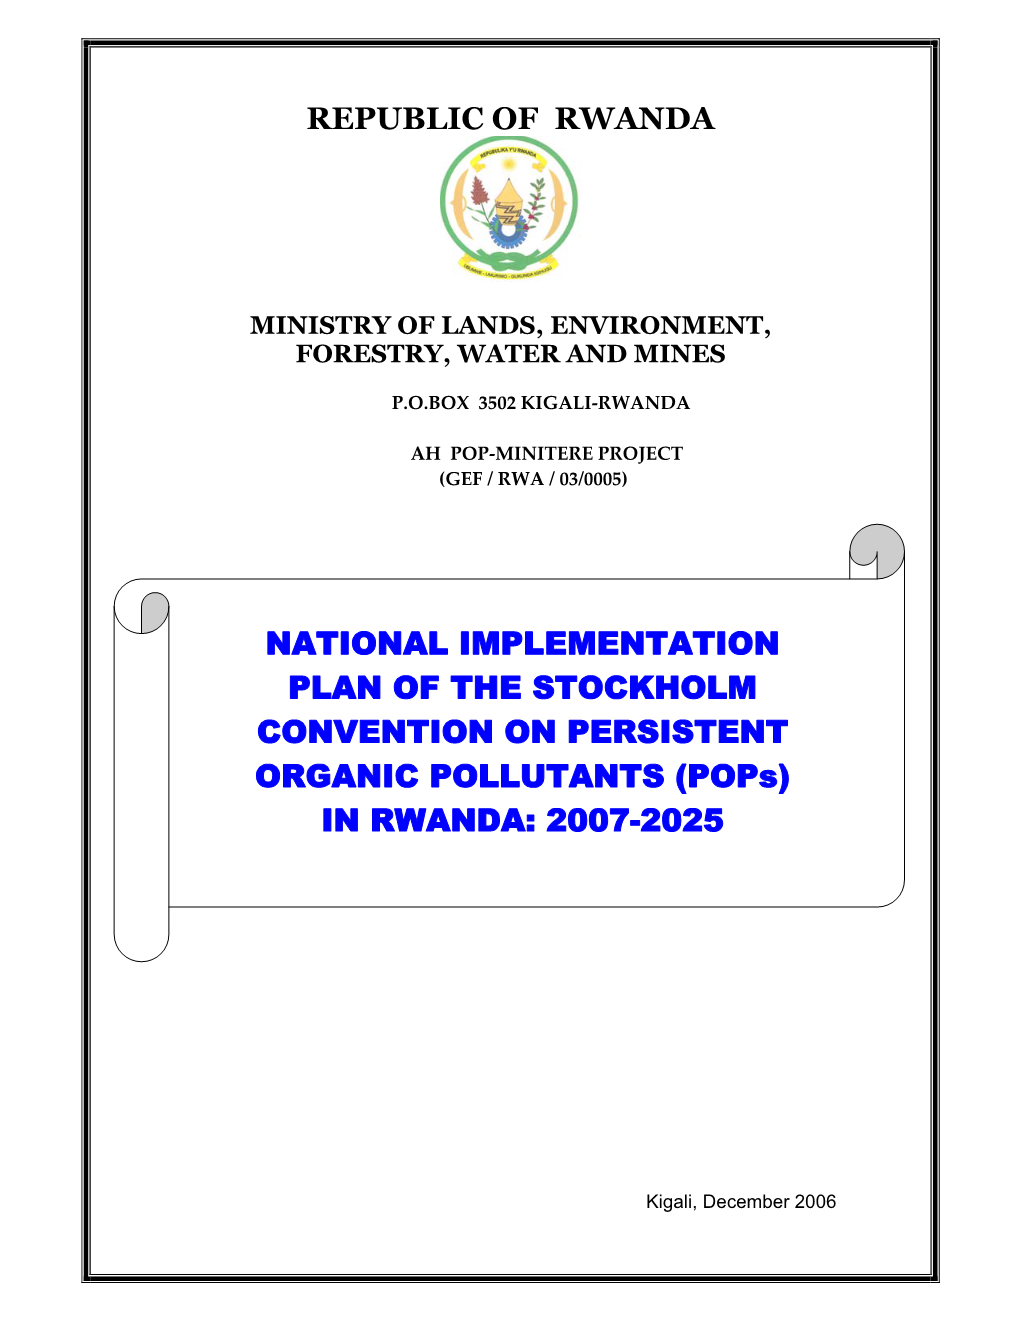 REPUBLIC of RWANDA NATIONAL IMPLEMENTATION PLAN of the STOCKHOLM CONVENTION on PERSISTENT ORGANIC POLLUTANTS (Pops) in RWAN